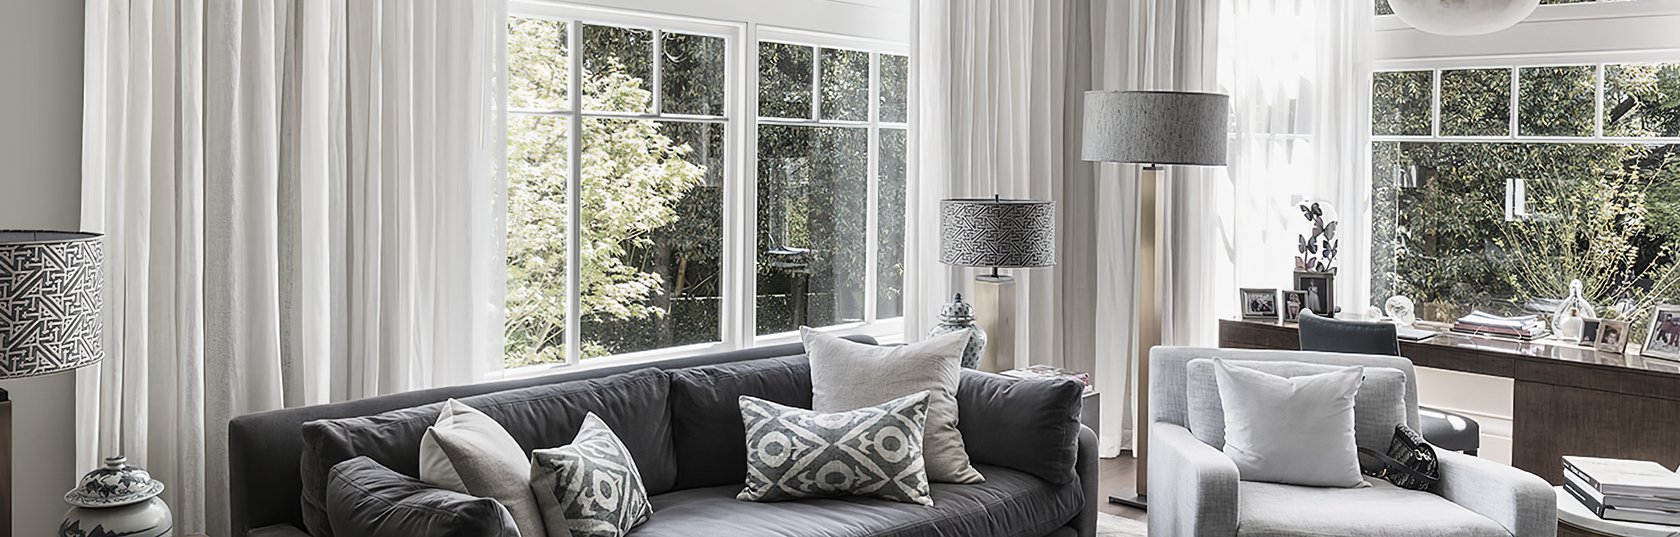 How to choose curtains for your living room